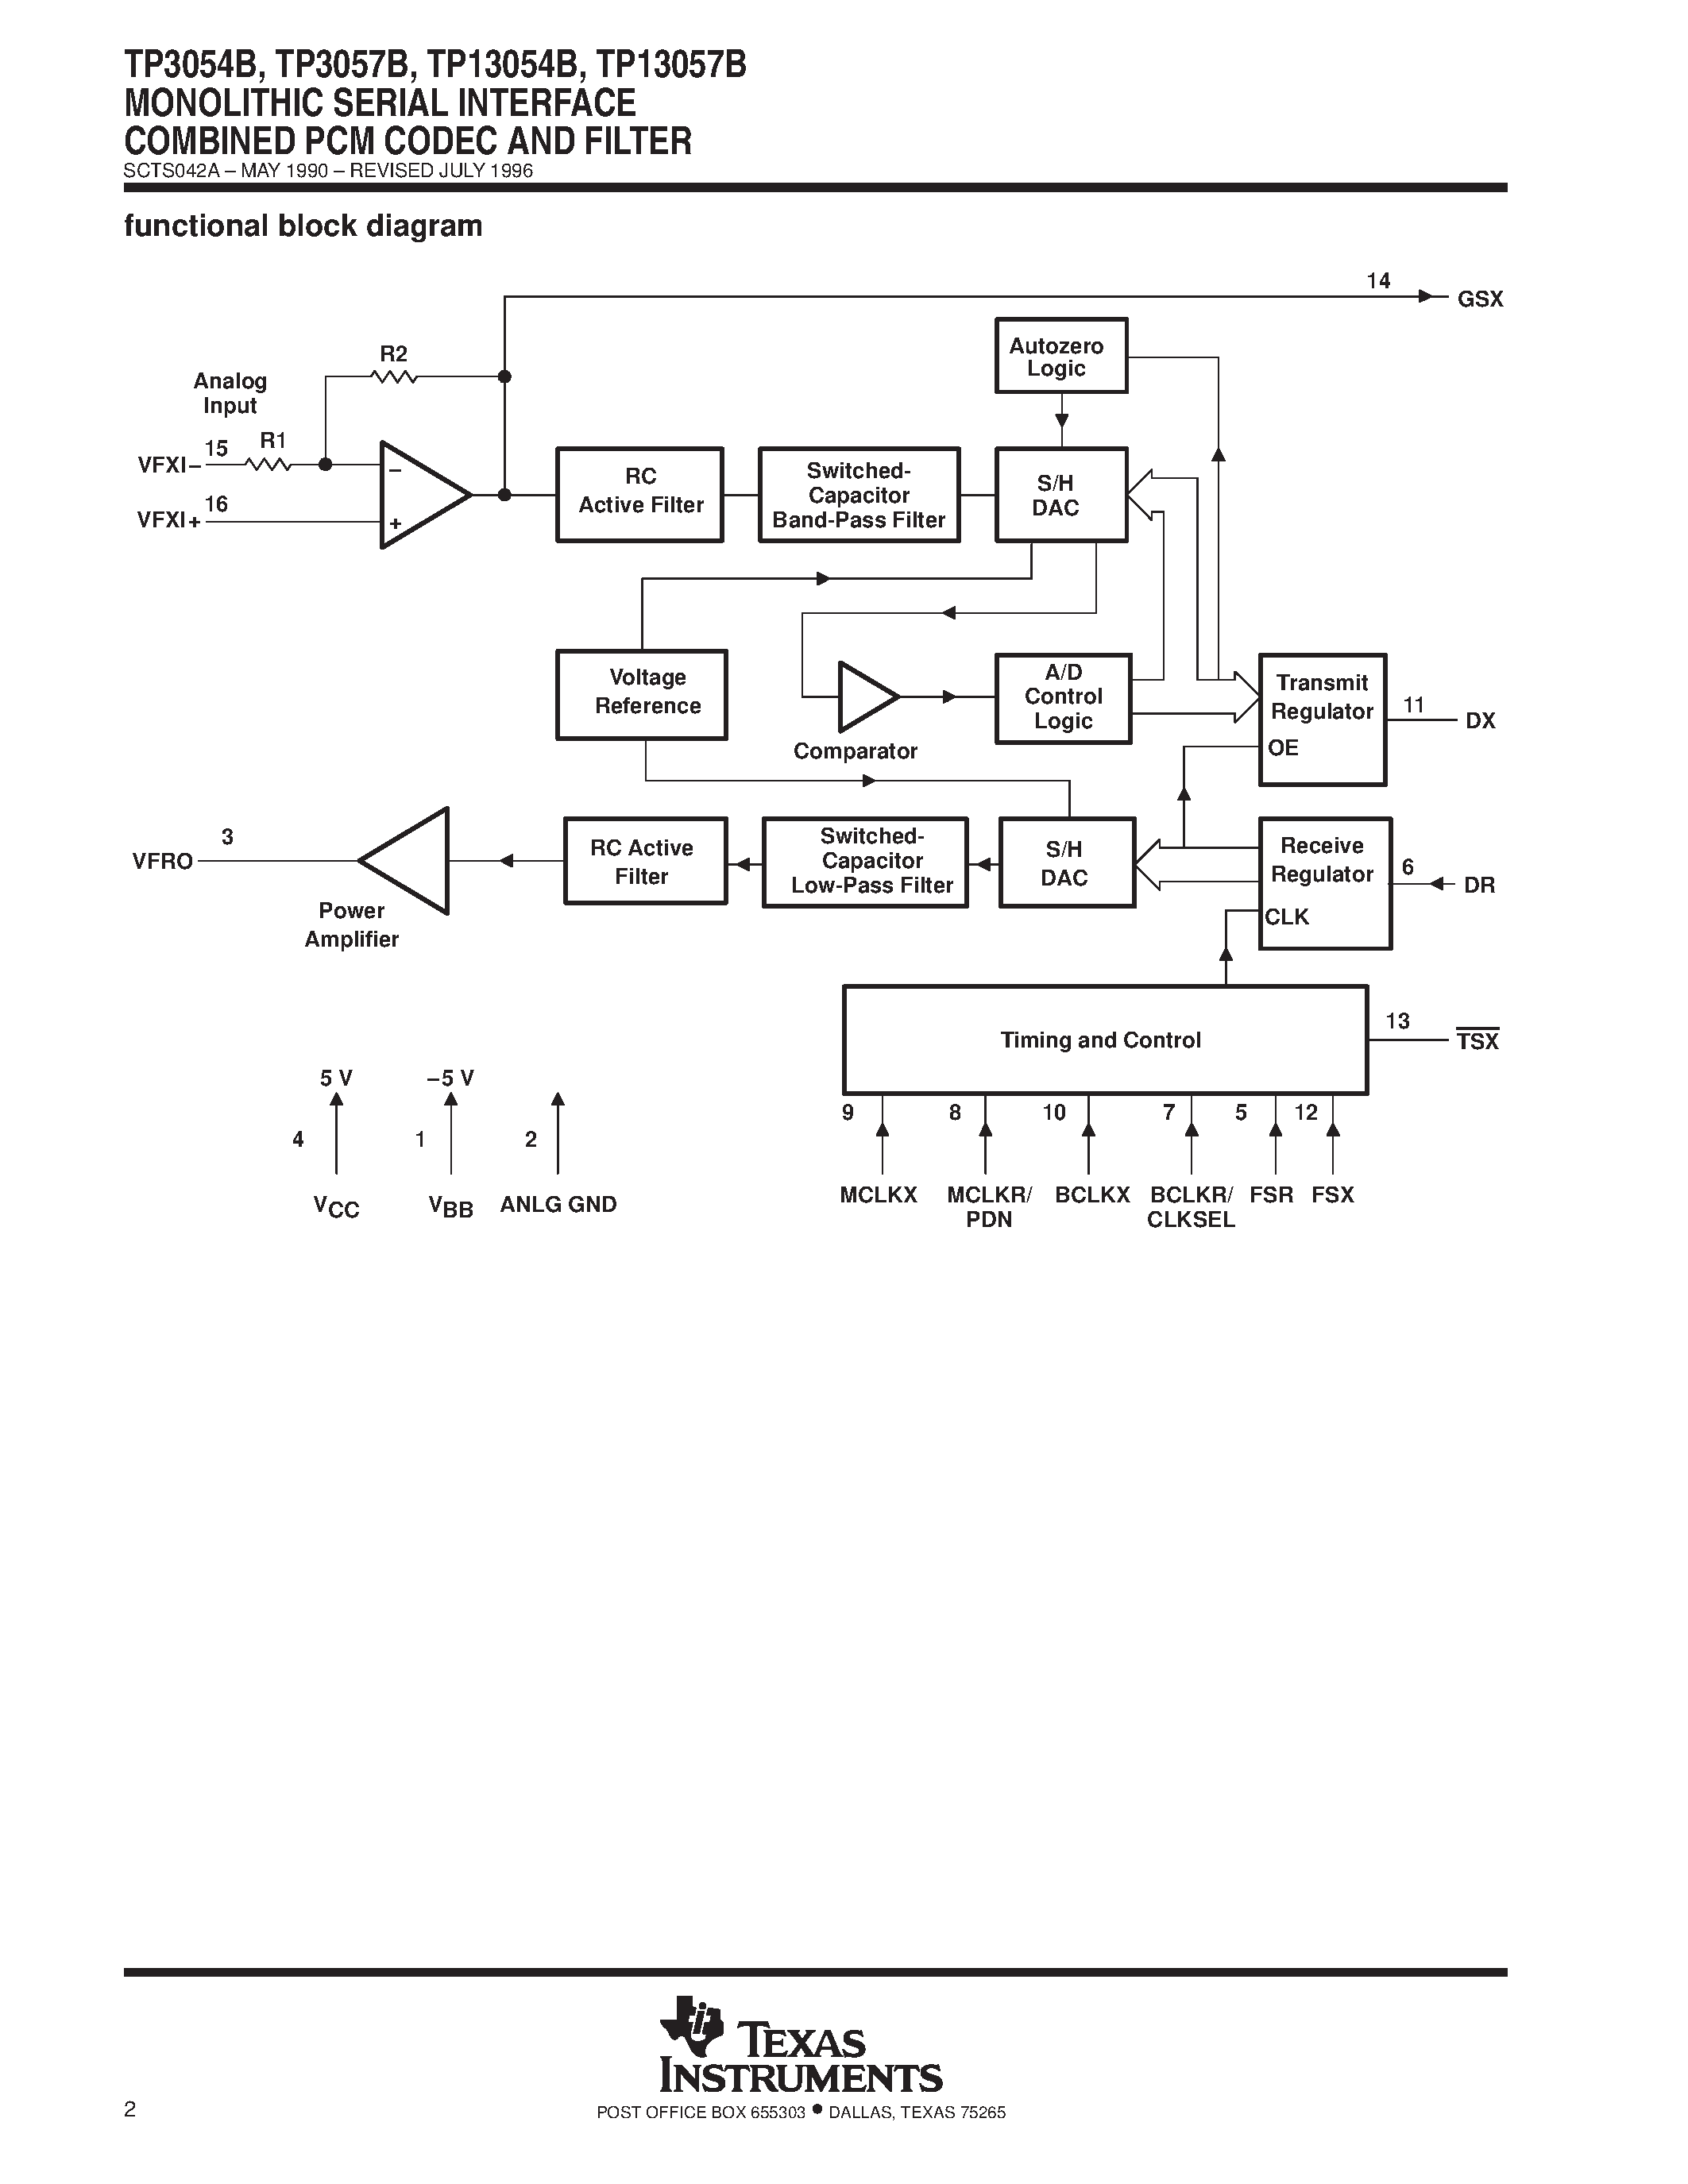 Datasheet TP13057BDW - MONOLITHIC SERIAL INTERFACE COMBINED PCM CODEC AND FILTER page 2